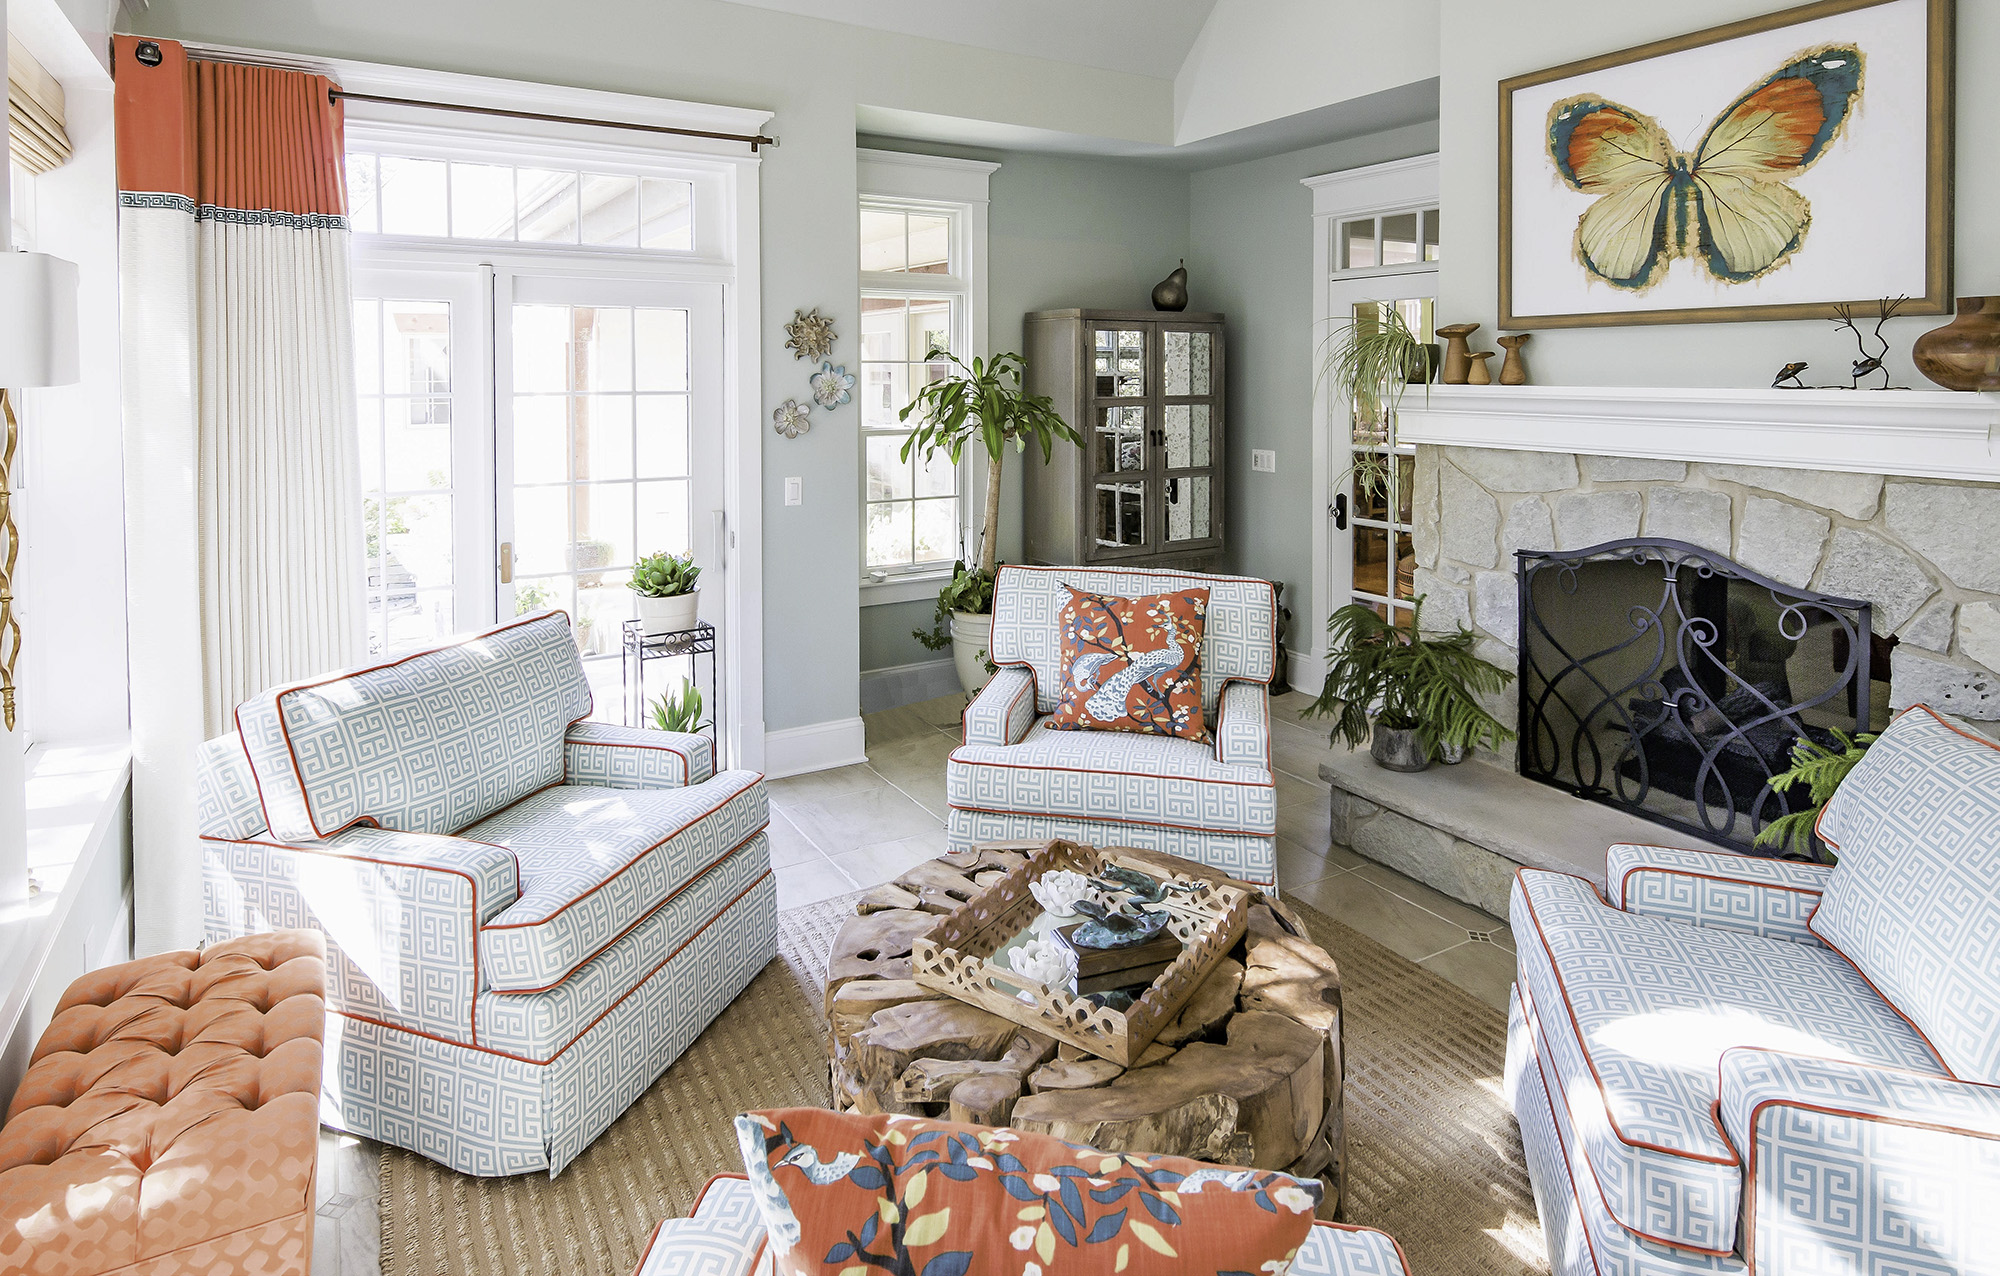 Sunroom with teal and coral upholstered furniture and butterfly artwork over the stone fireplace